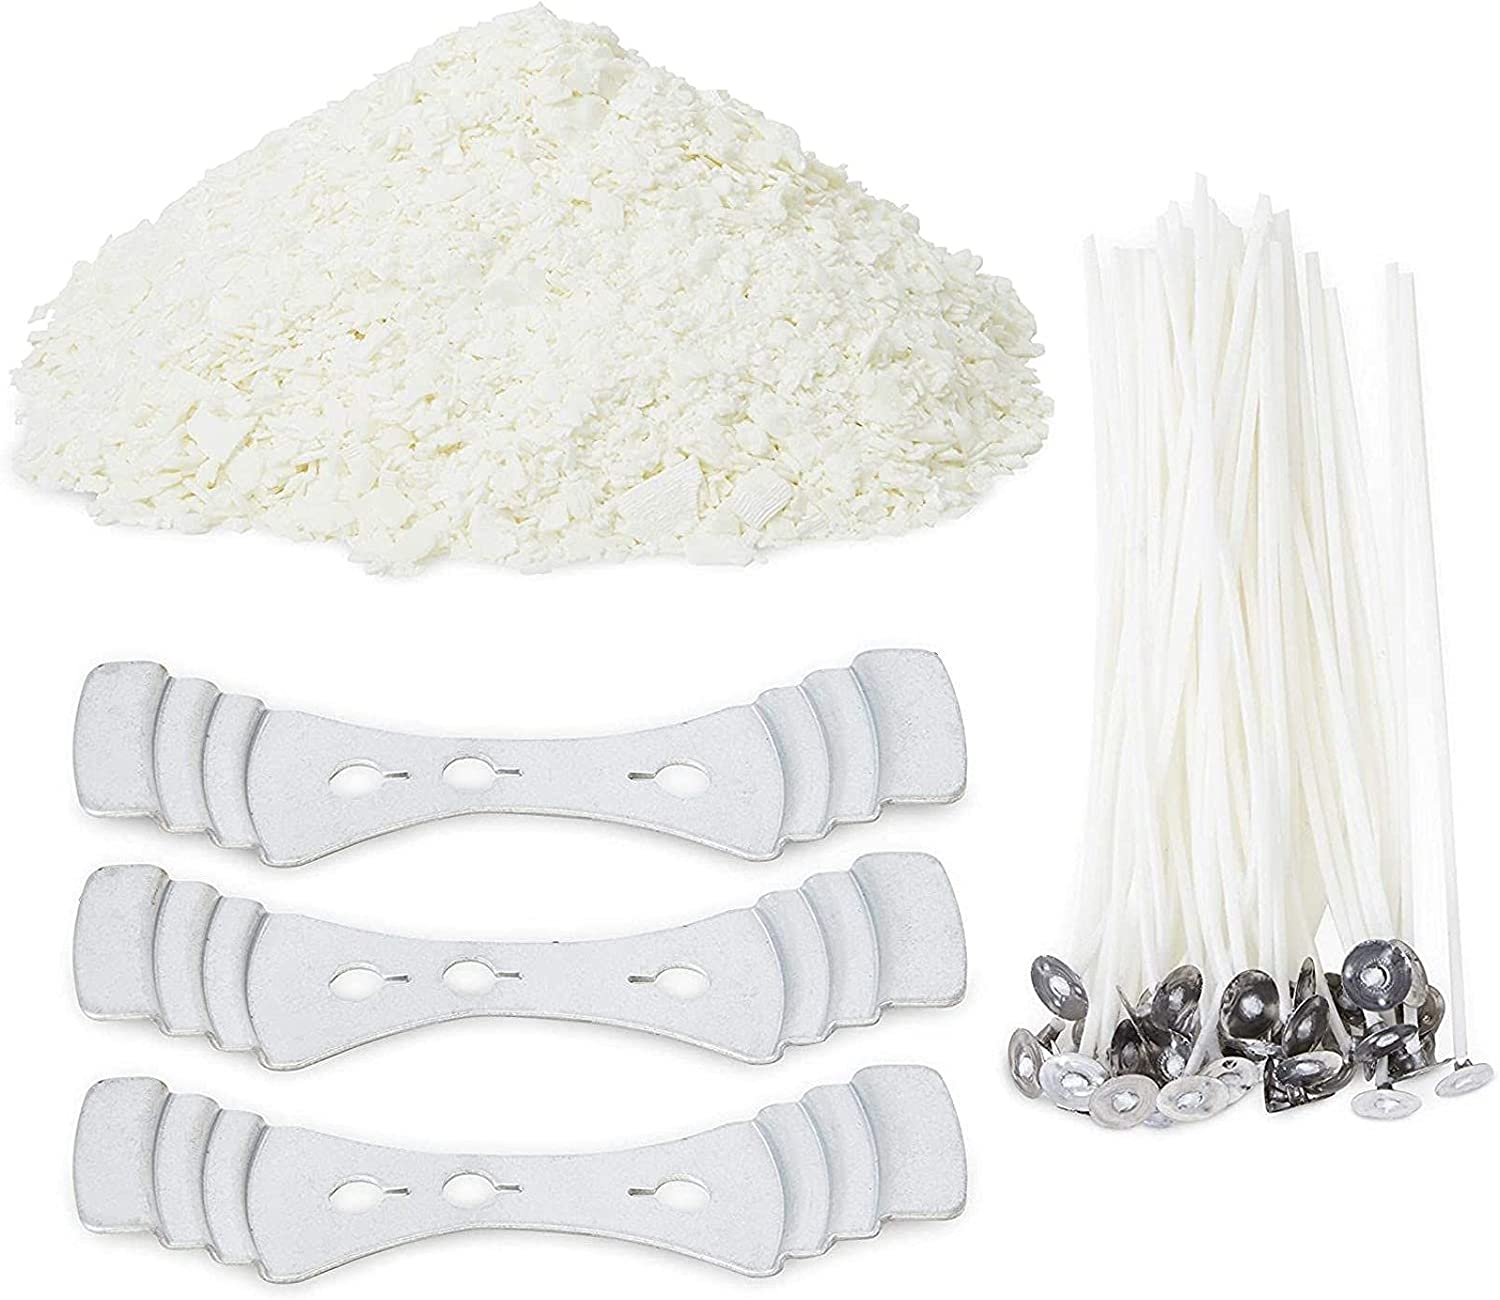 DIY Candle Making Kit with 5 lb White Palm Wax, 50 Wicks (54 Pieces)